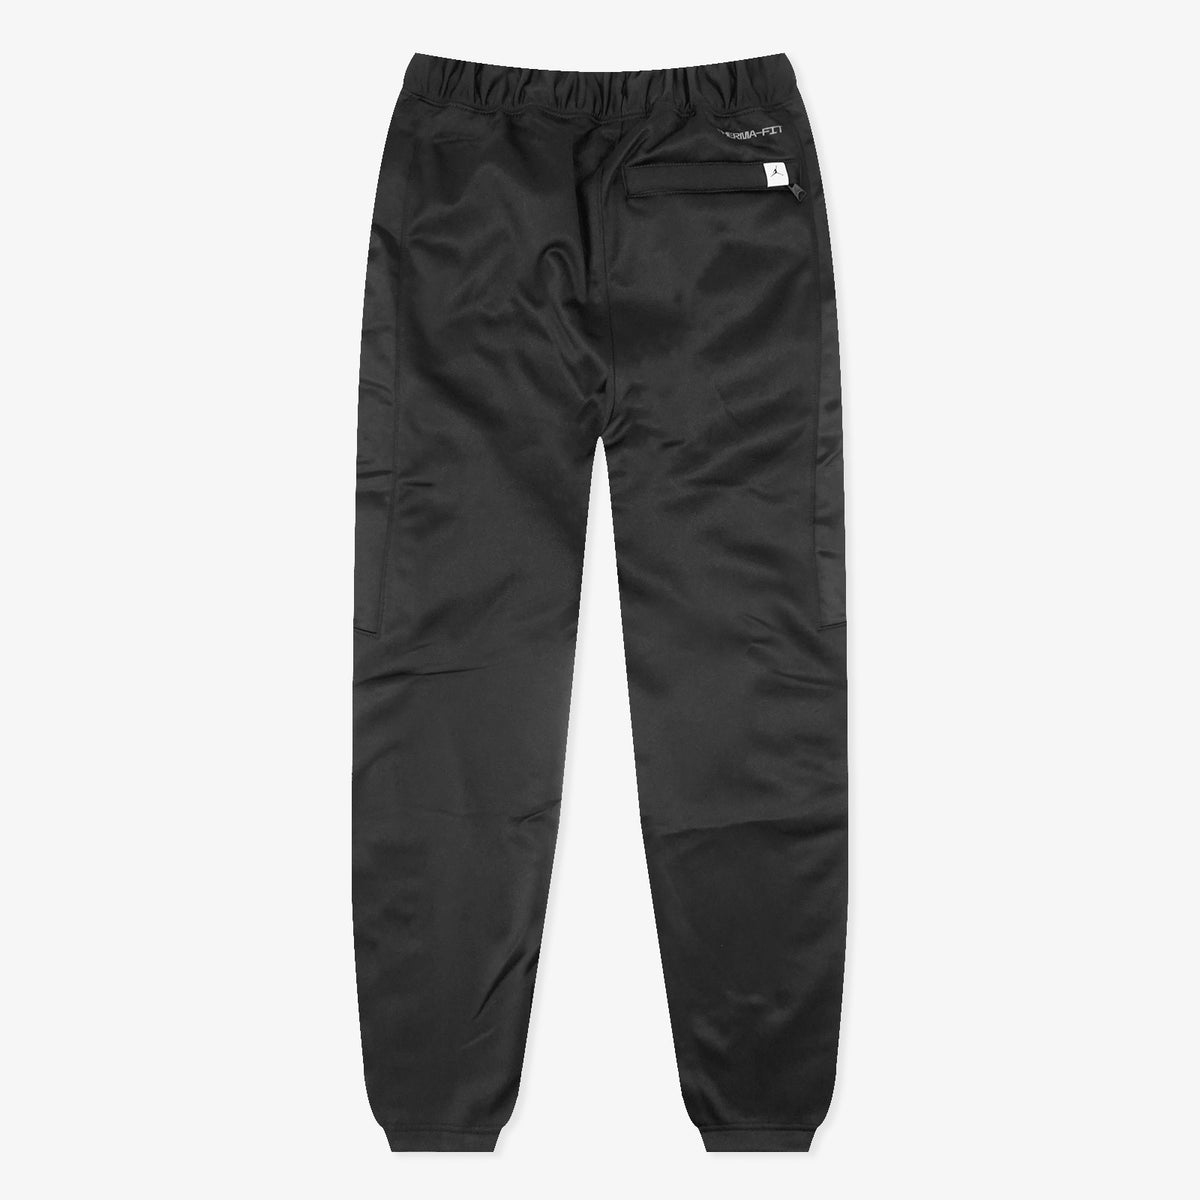 Zion Therma-FIT Pants - Black